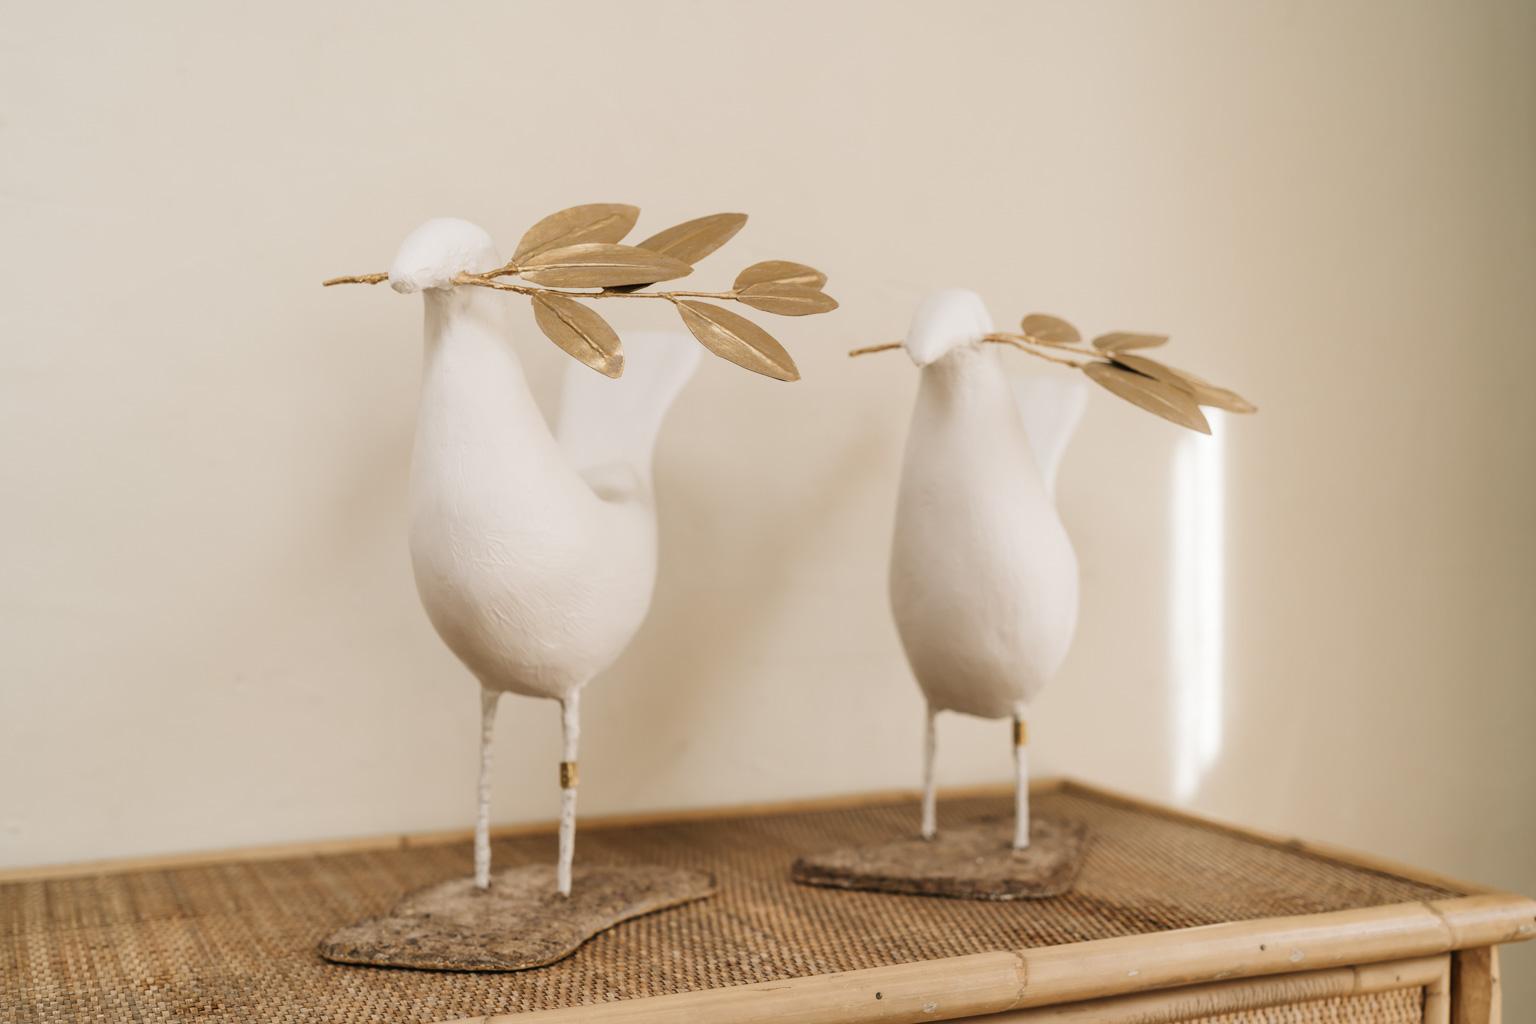 peace birds, poetic art by French artist José Esteves. Each one is unique,
Measures: one is 37 cm high x 35 cm long and 26 cm deep, the other one is 
35 cm high x 36 cm long and 26 cm deep.